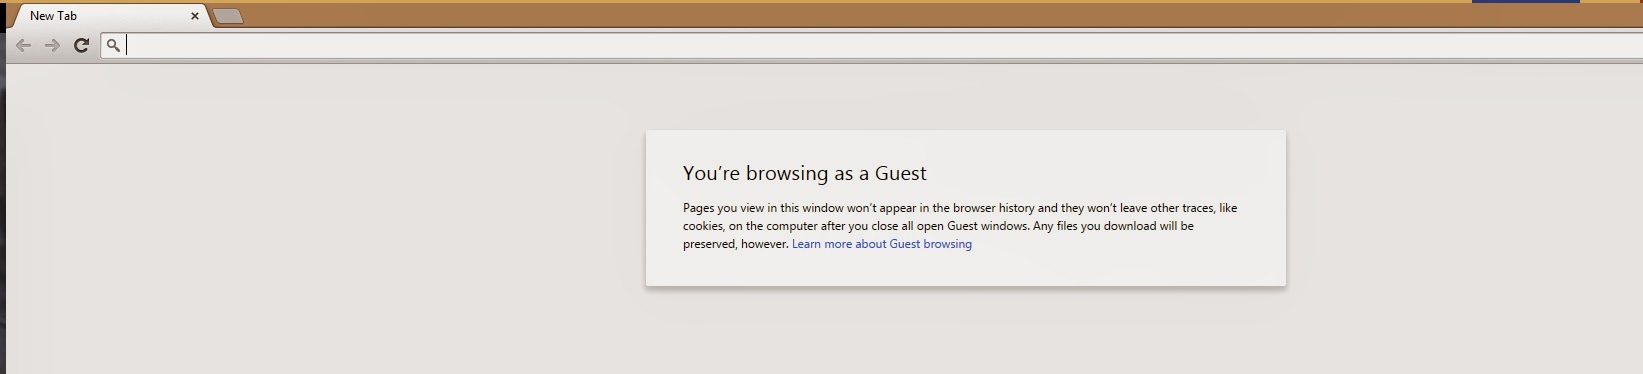 Guest browsing option in Google Chrome